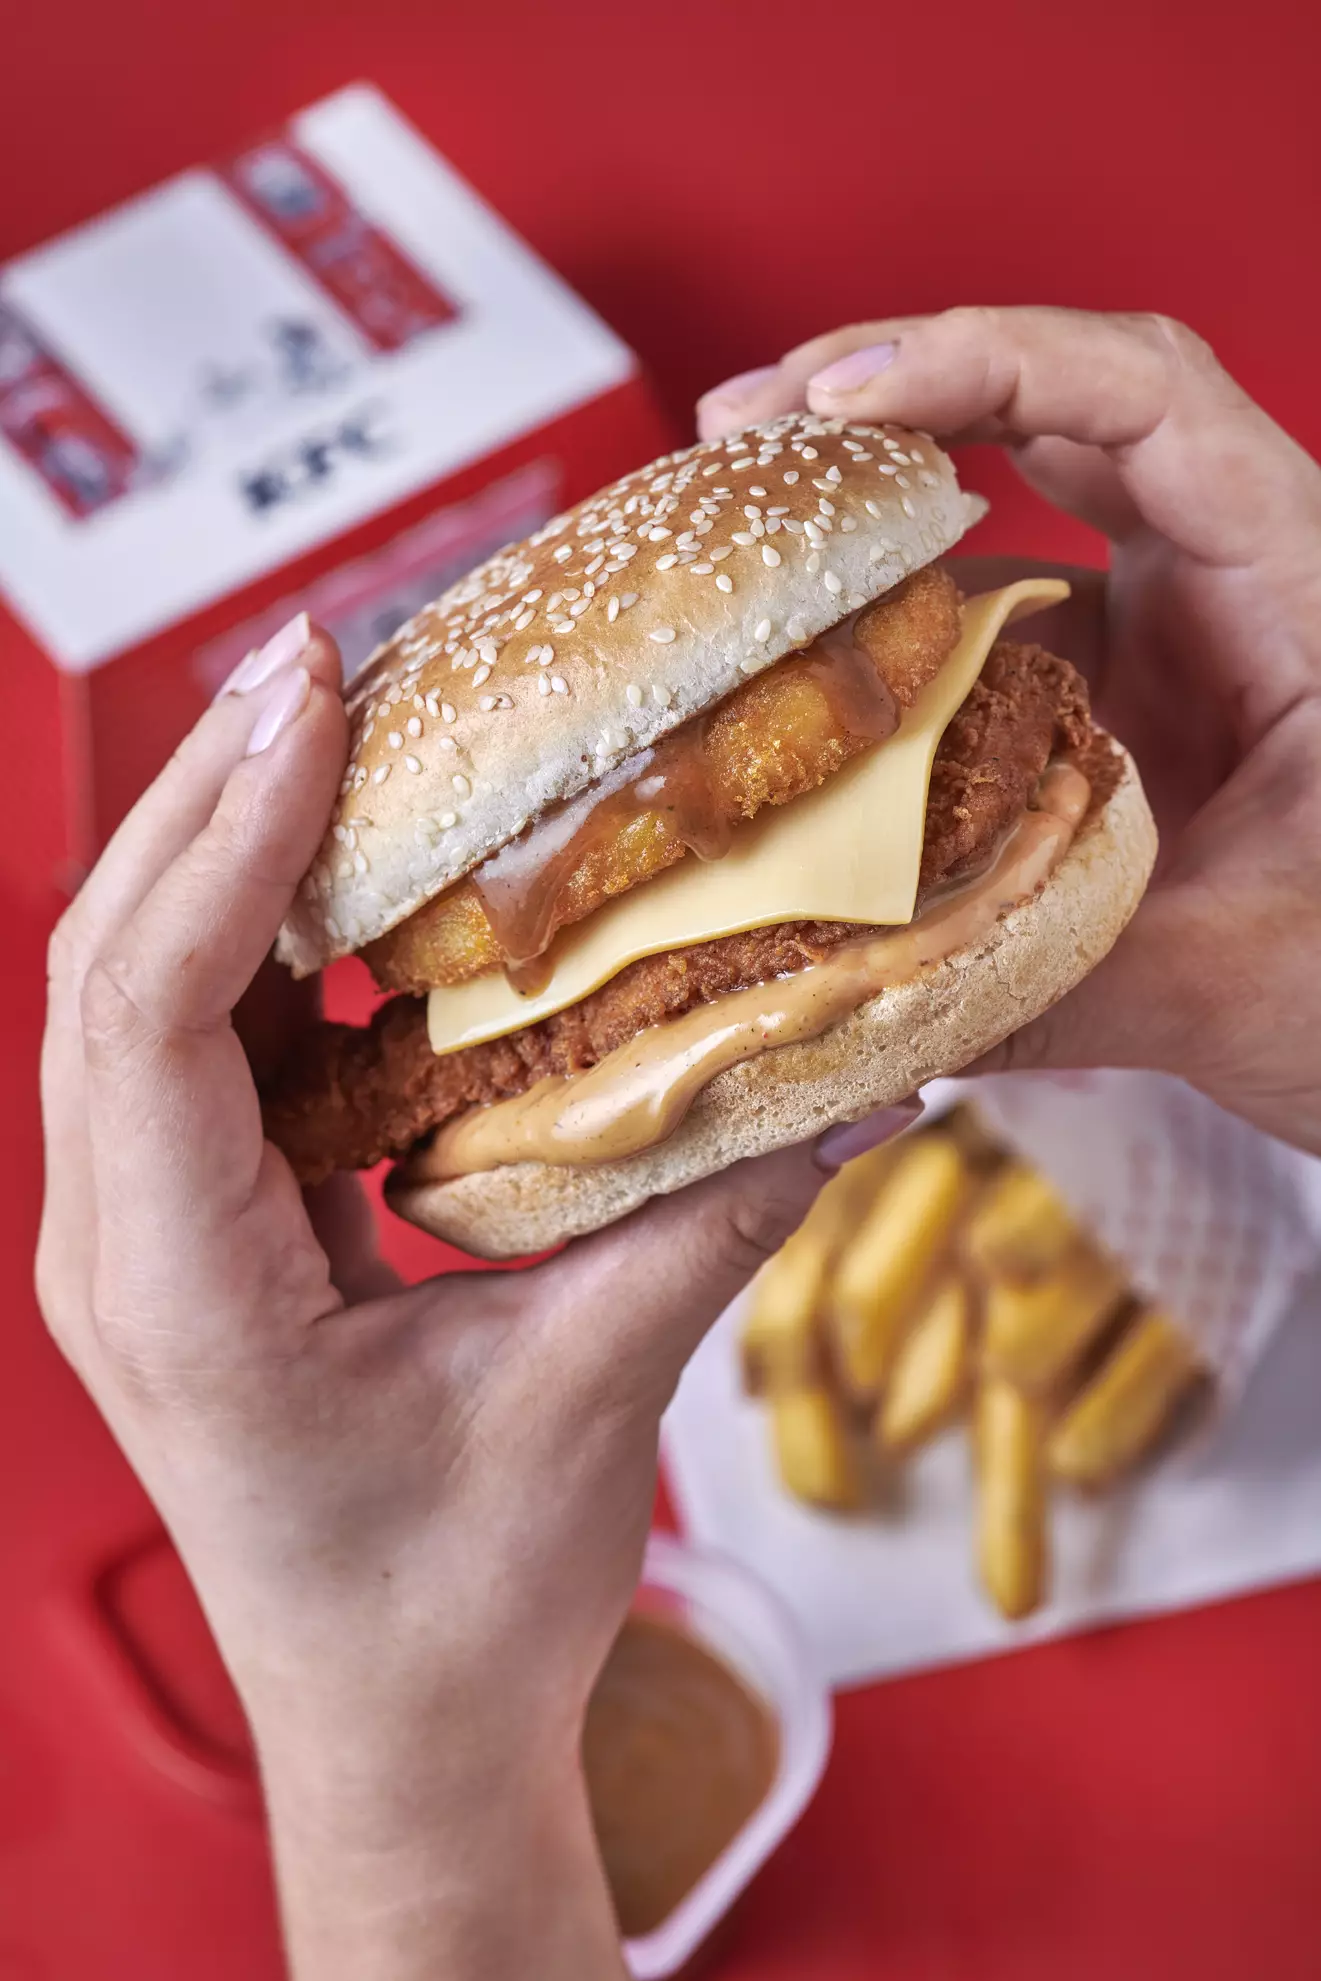 The extra special hash brown has been 'expertly designed' to hold an impressive amount of gravy (